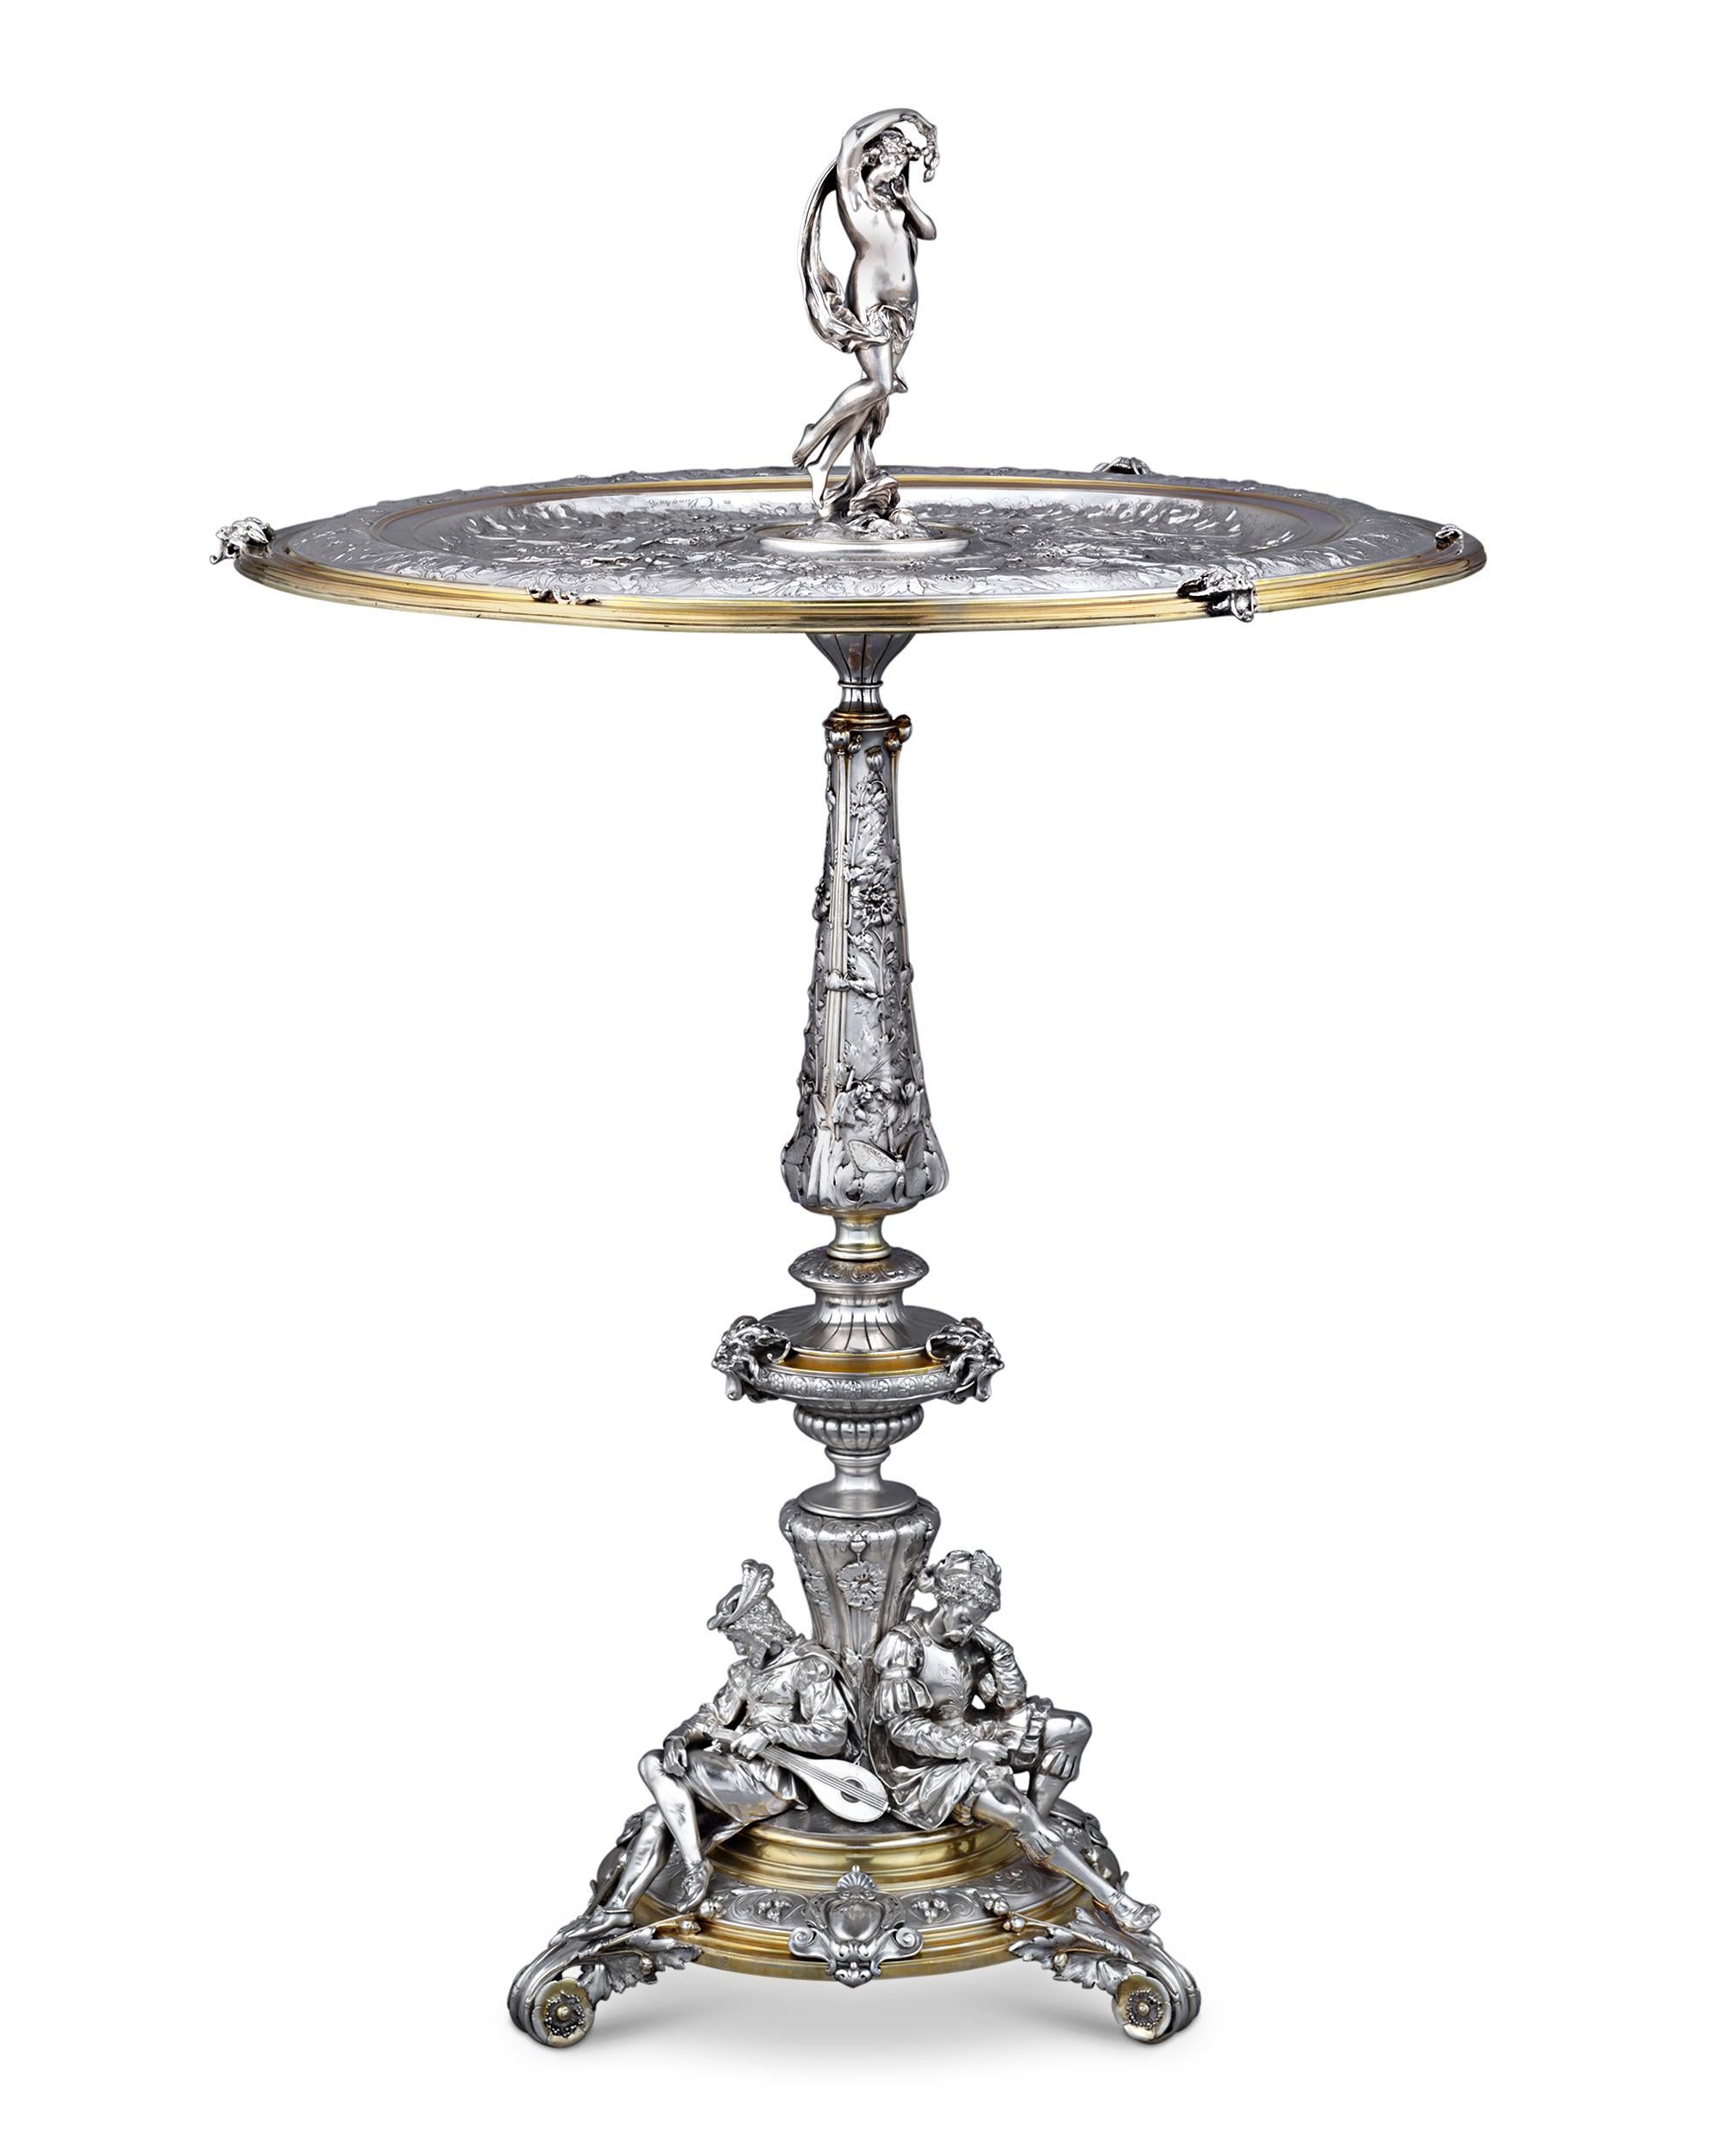 This remarkable and historic parcel-gilt electroplate table hails from renowned British firm Elkington & Co., the distinguished company that invented the art and science of silver plating. By the 1830s, they were awarded a patent for this